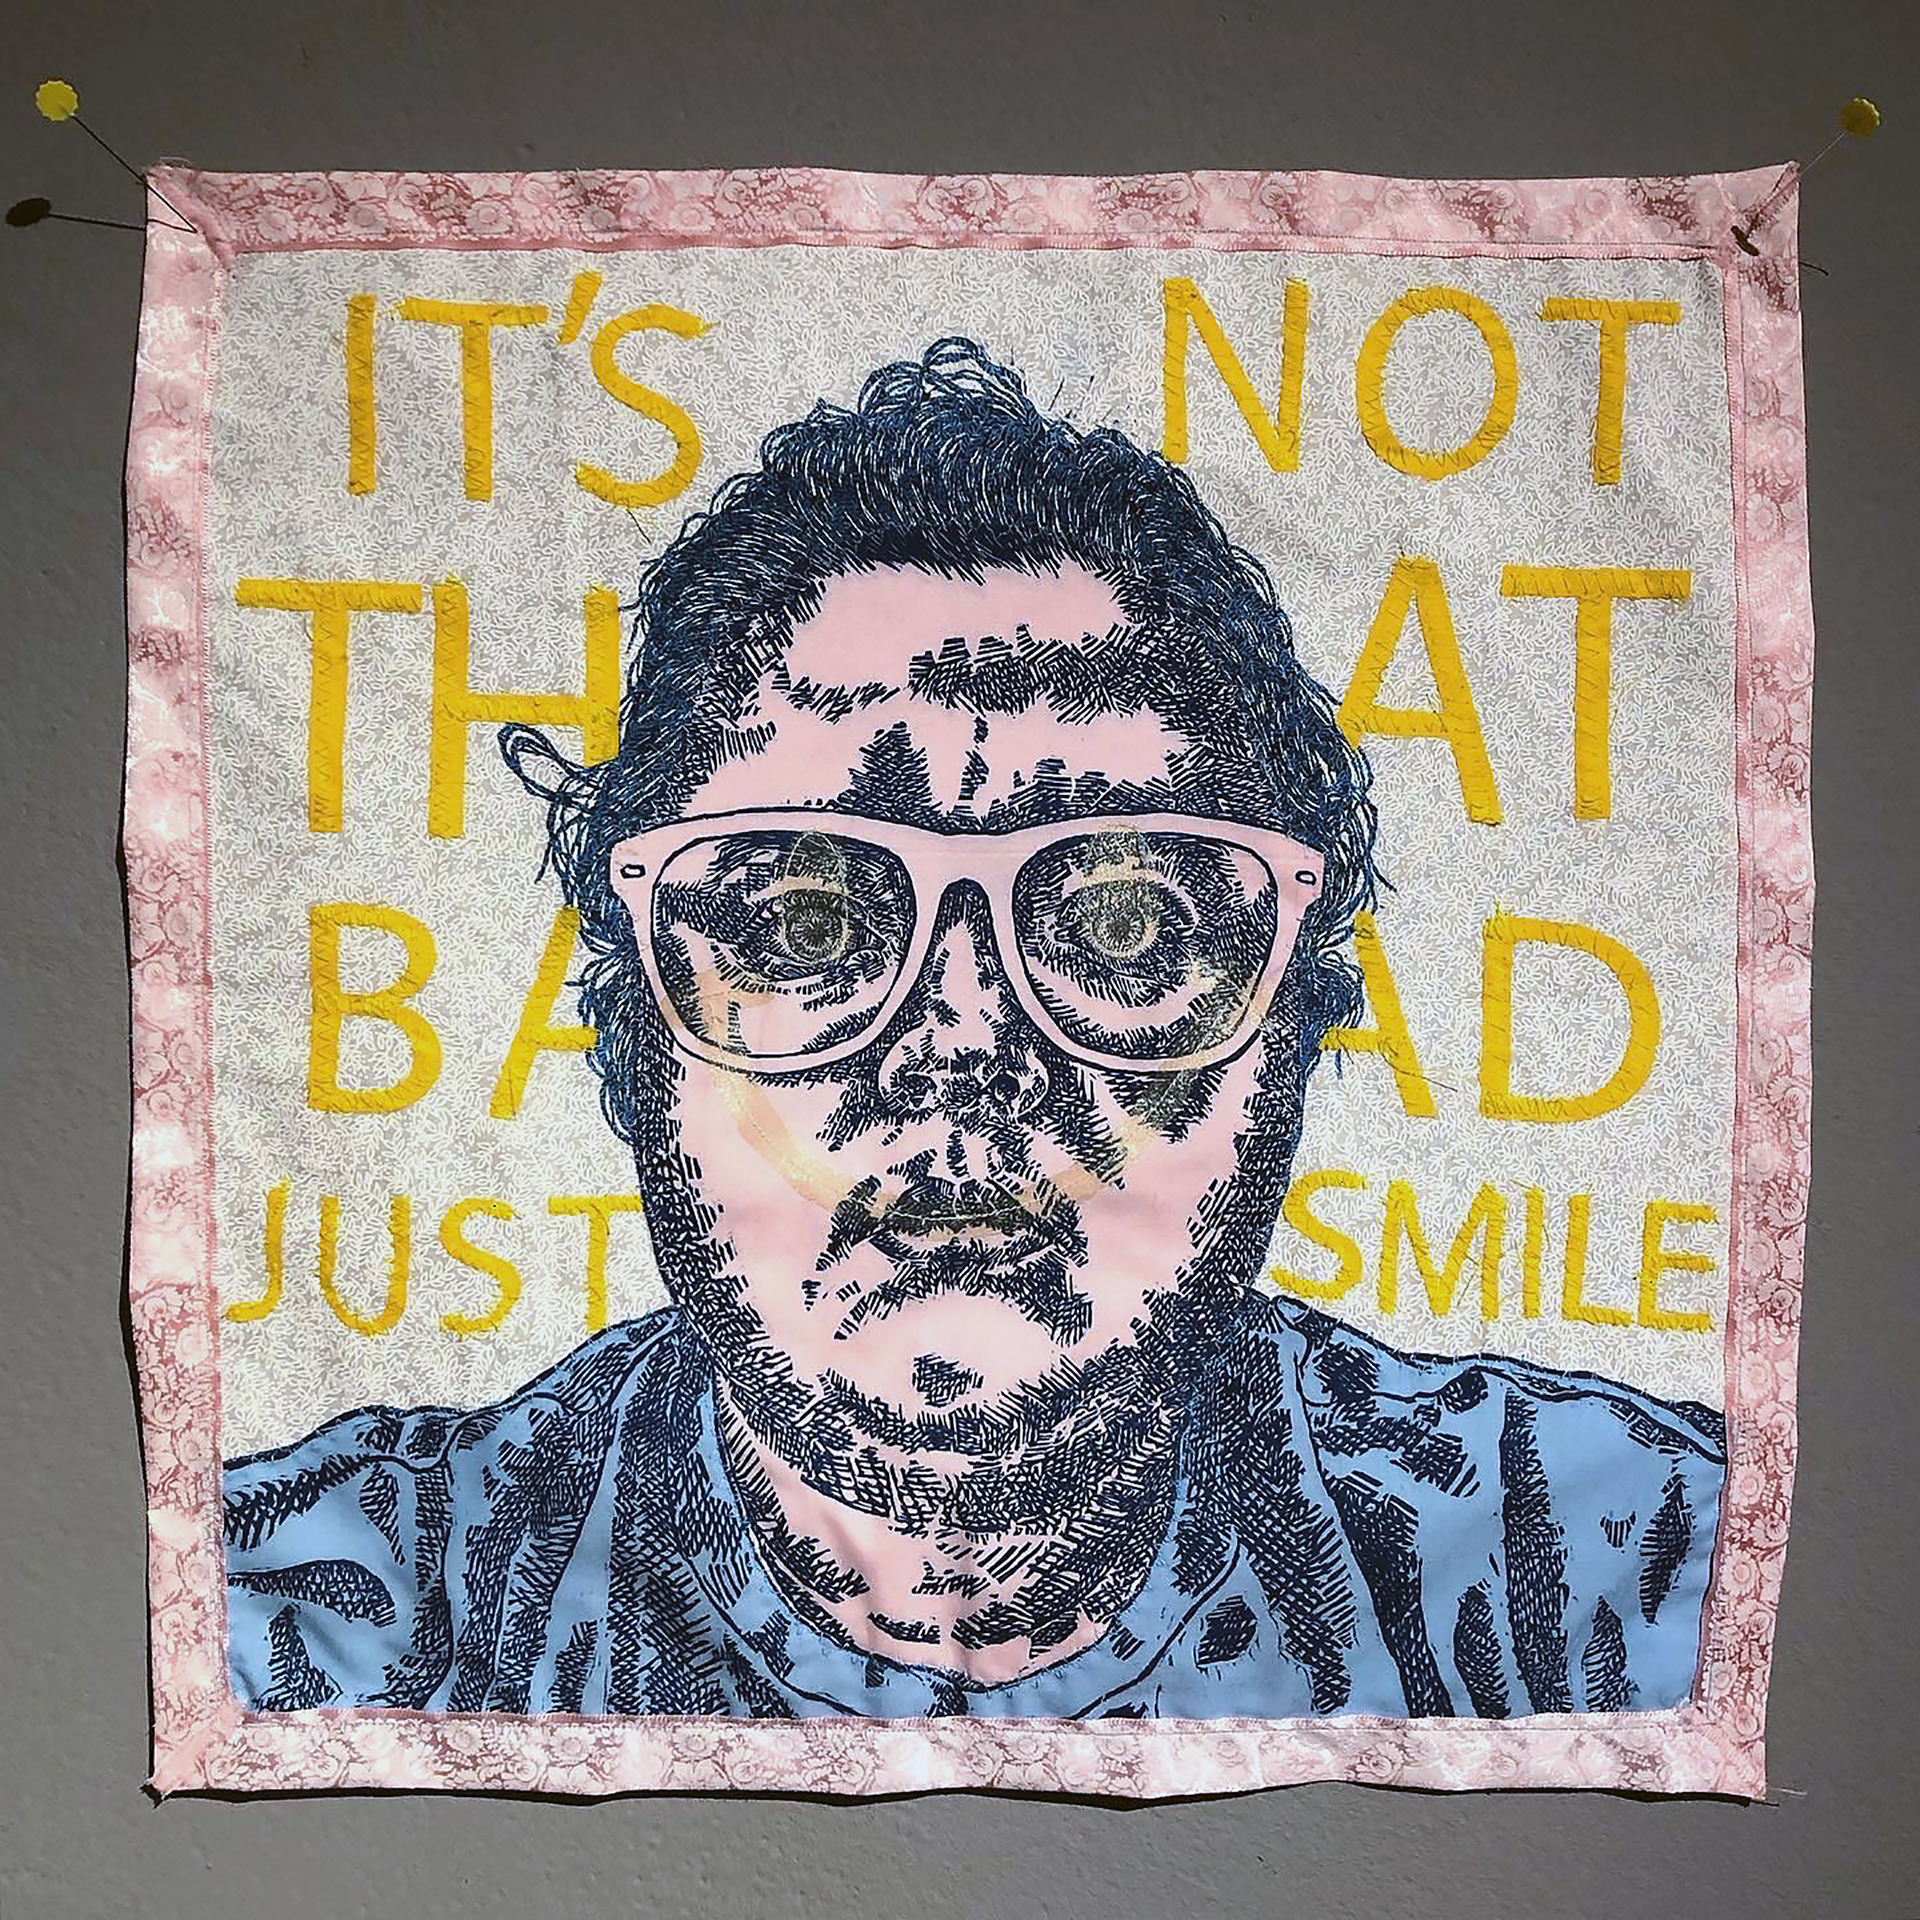 A relief printed portrait of the artist is printed on pink and blue fabric and appliquéd onto a quilt with the phrase "It's not that bad, just smile" stitched behind the figure. A subtle smiley face overlays the artist's face.